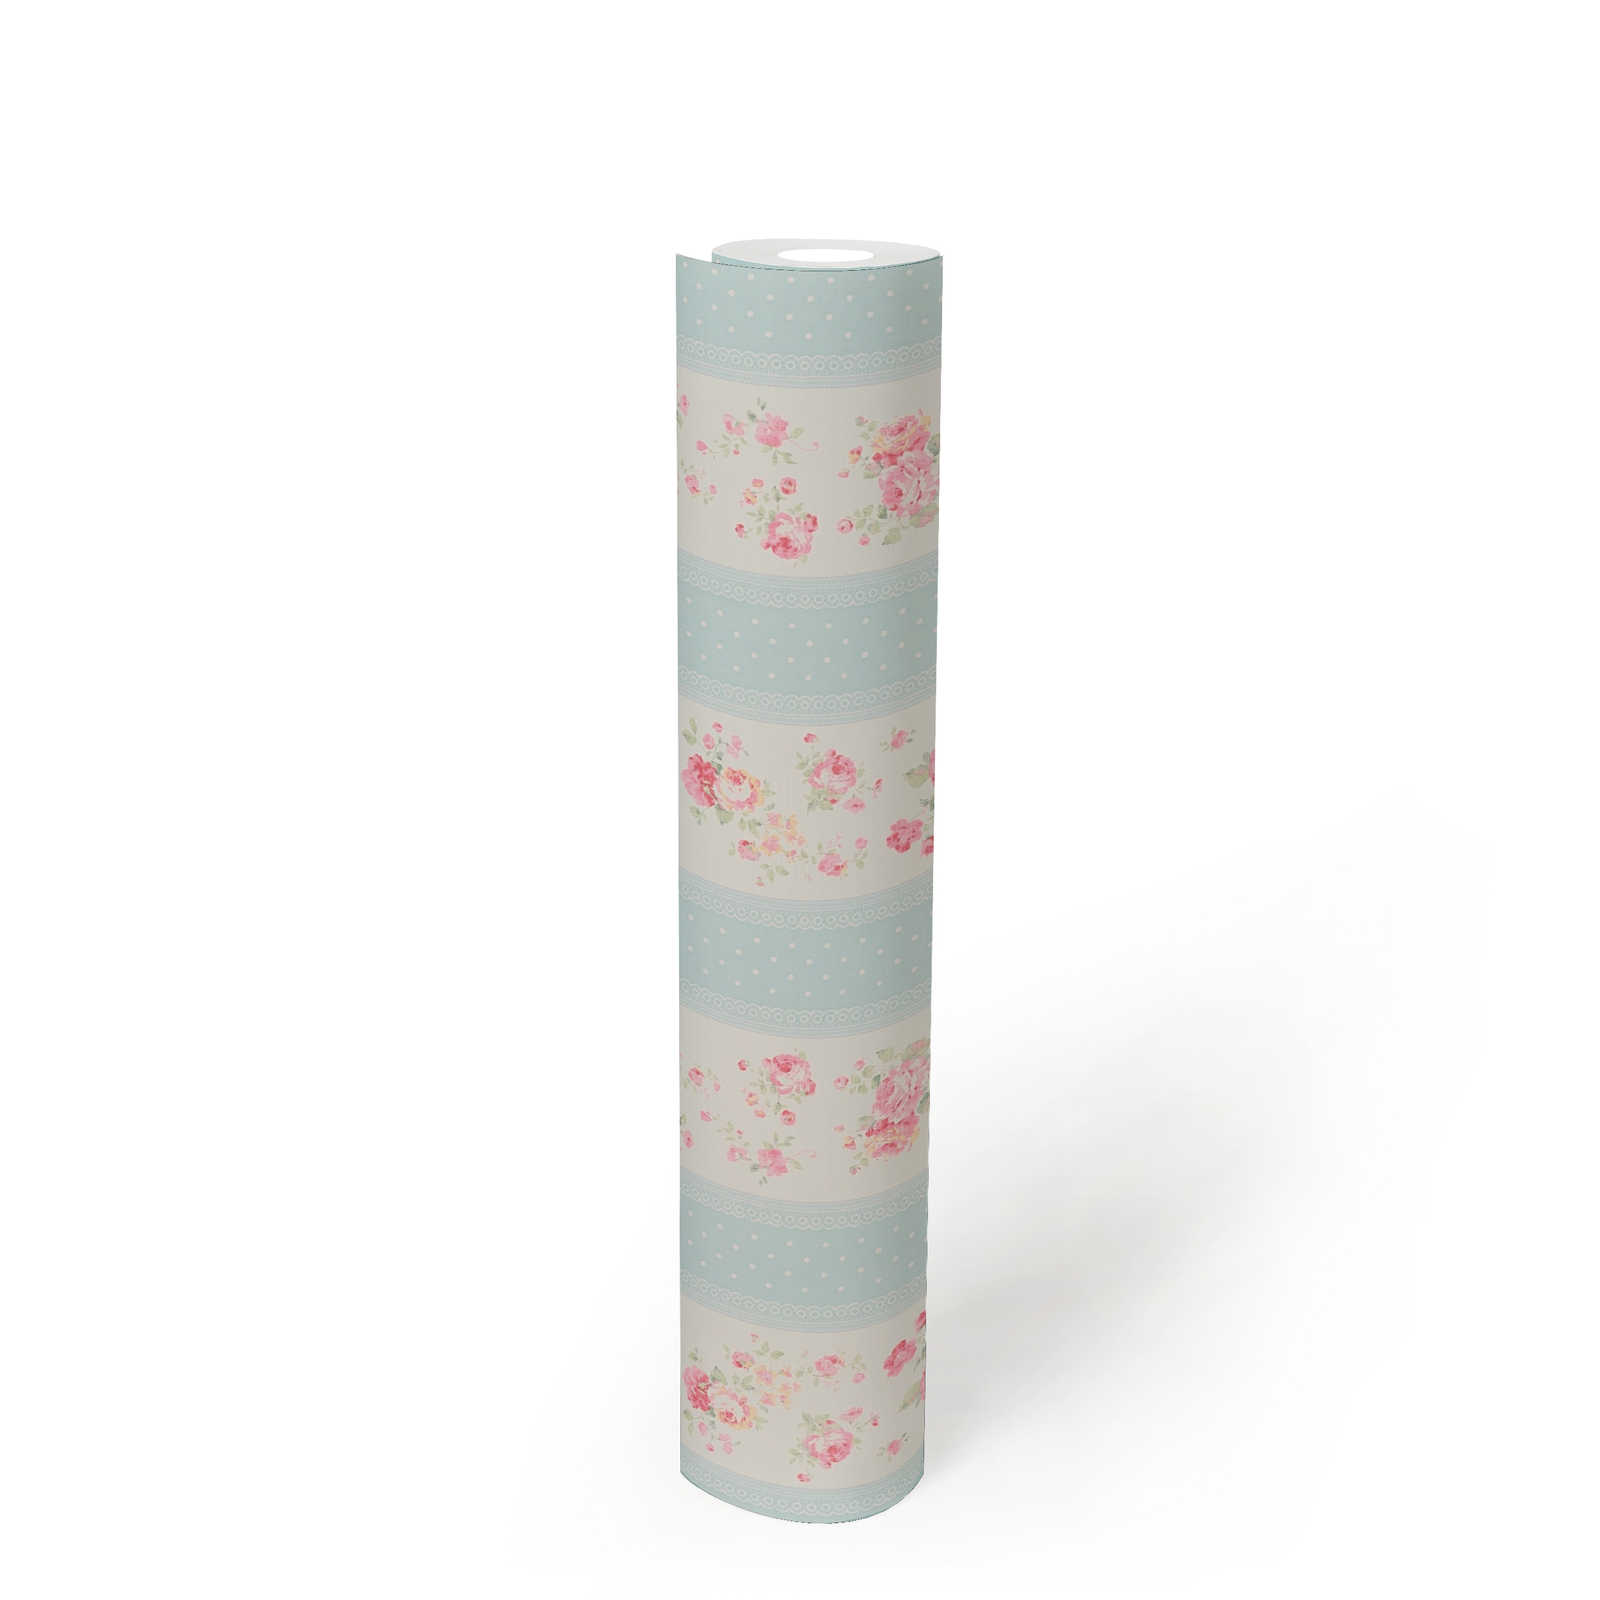             Non-woven wallpaper with stripes, flowers and dots - blue, white, pink
        